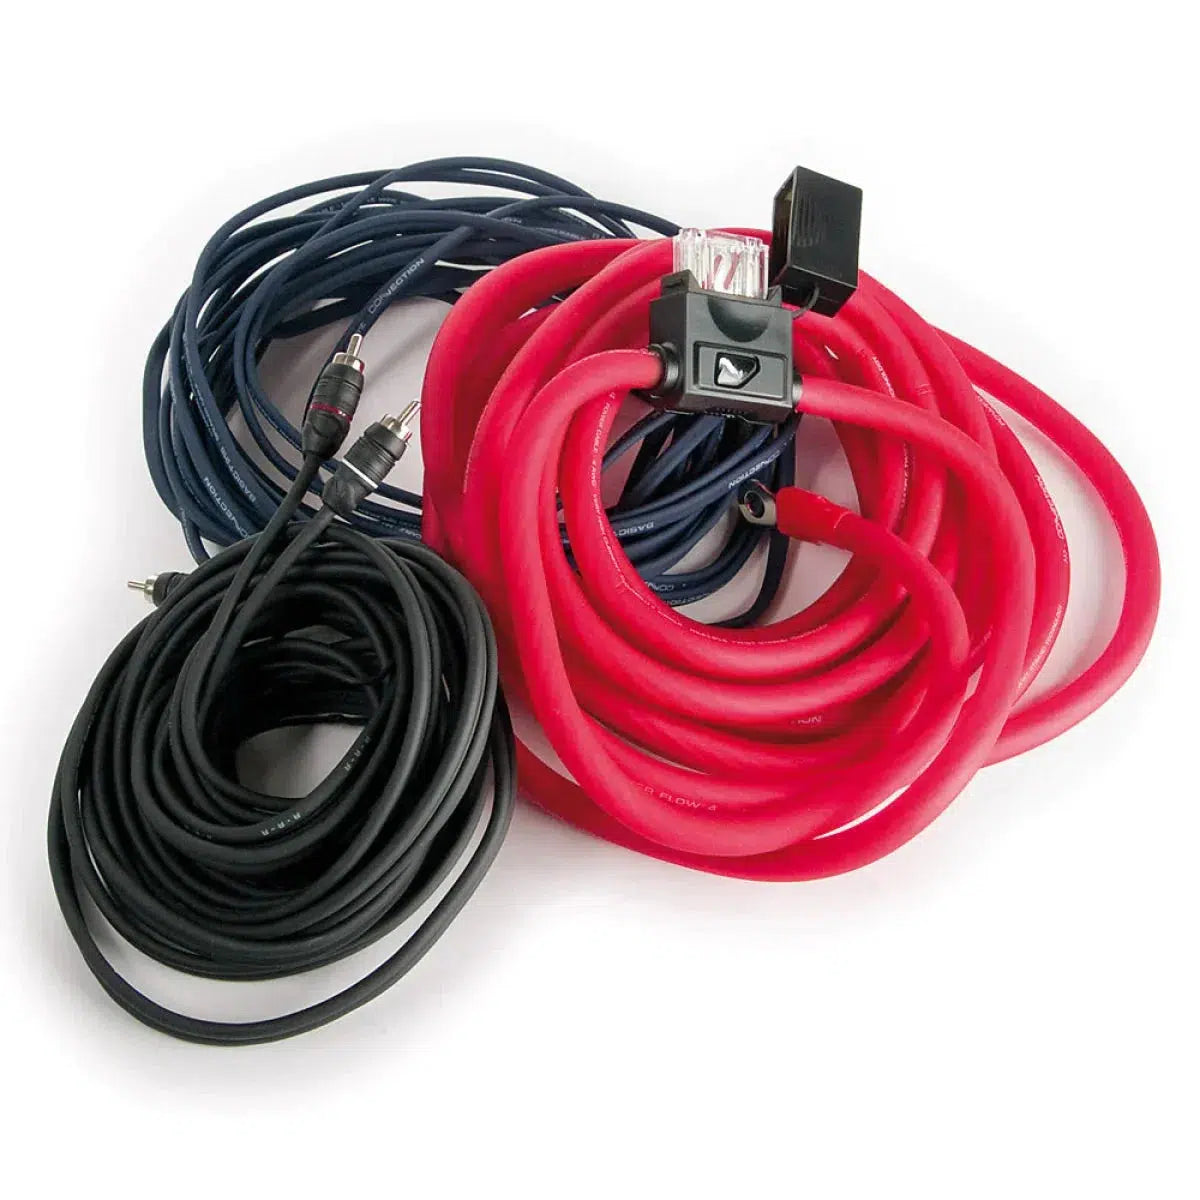 Audison Connection-First FSK 700.1-20mm² power cable-Masori.de